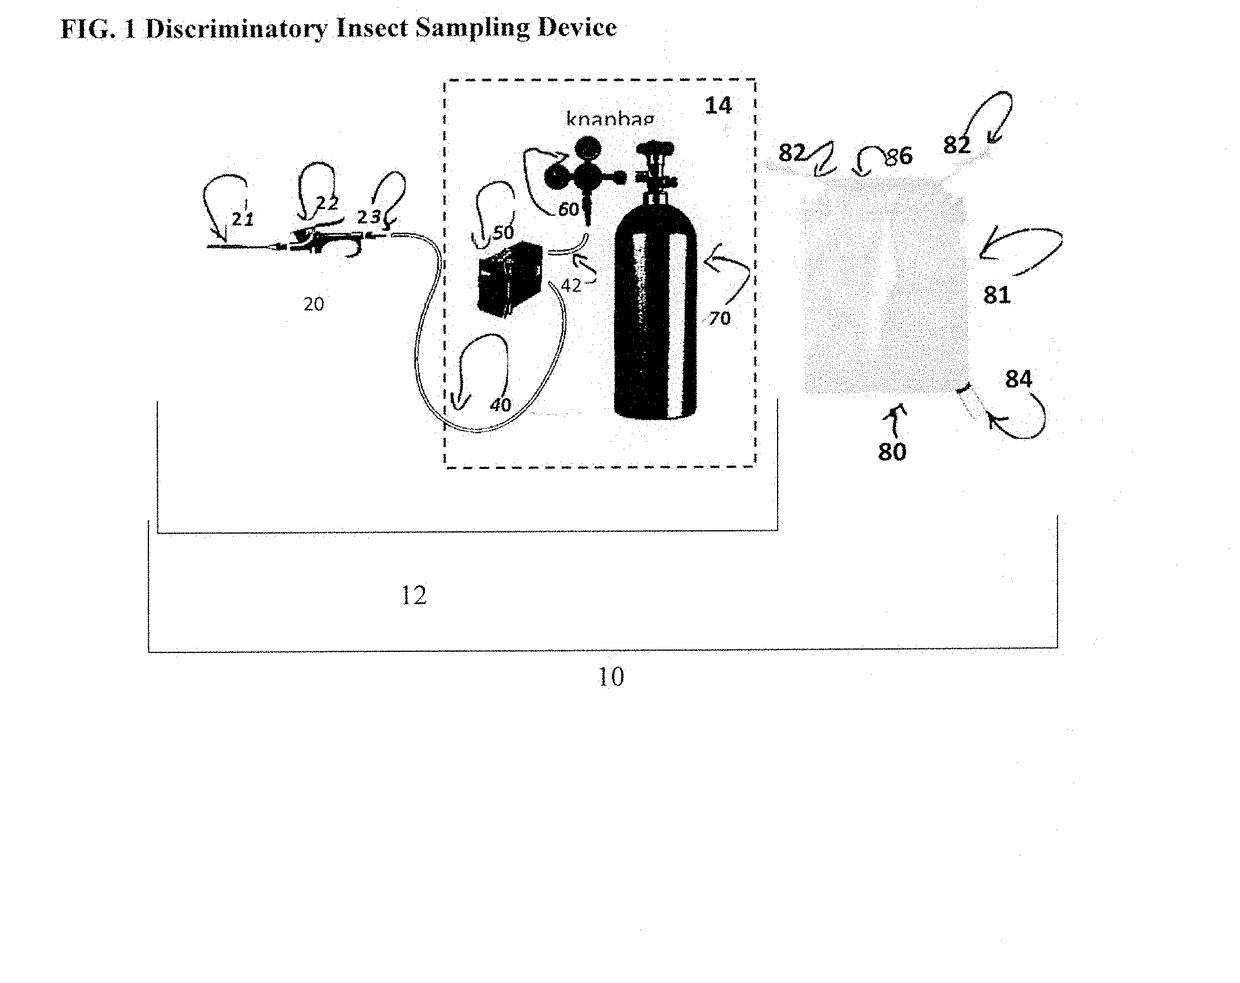 Discriminatory insect sampling device and method for use